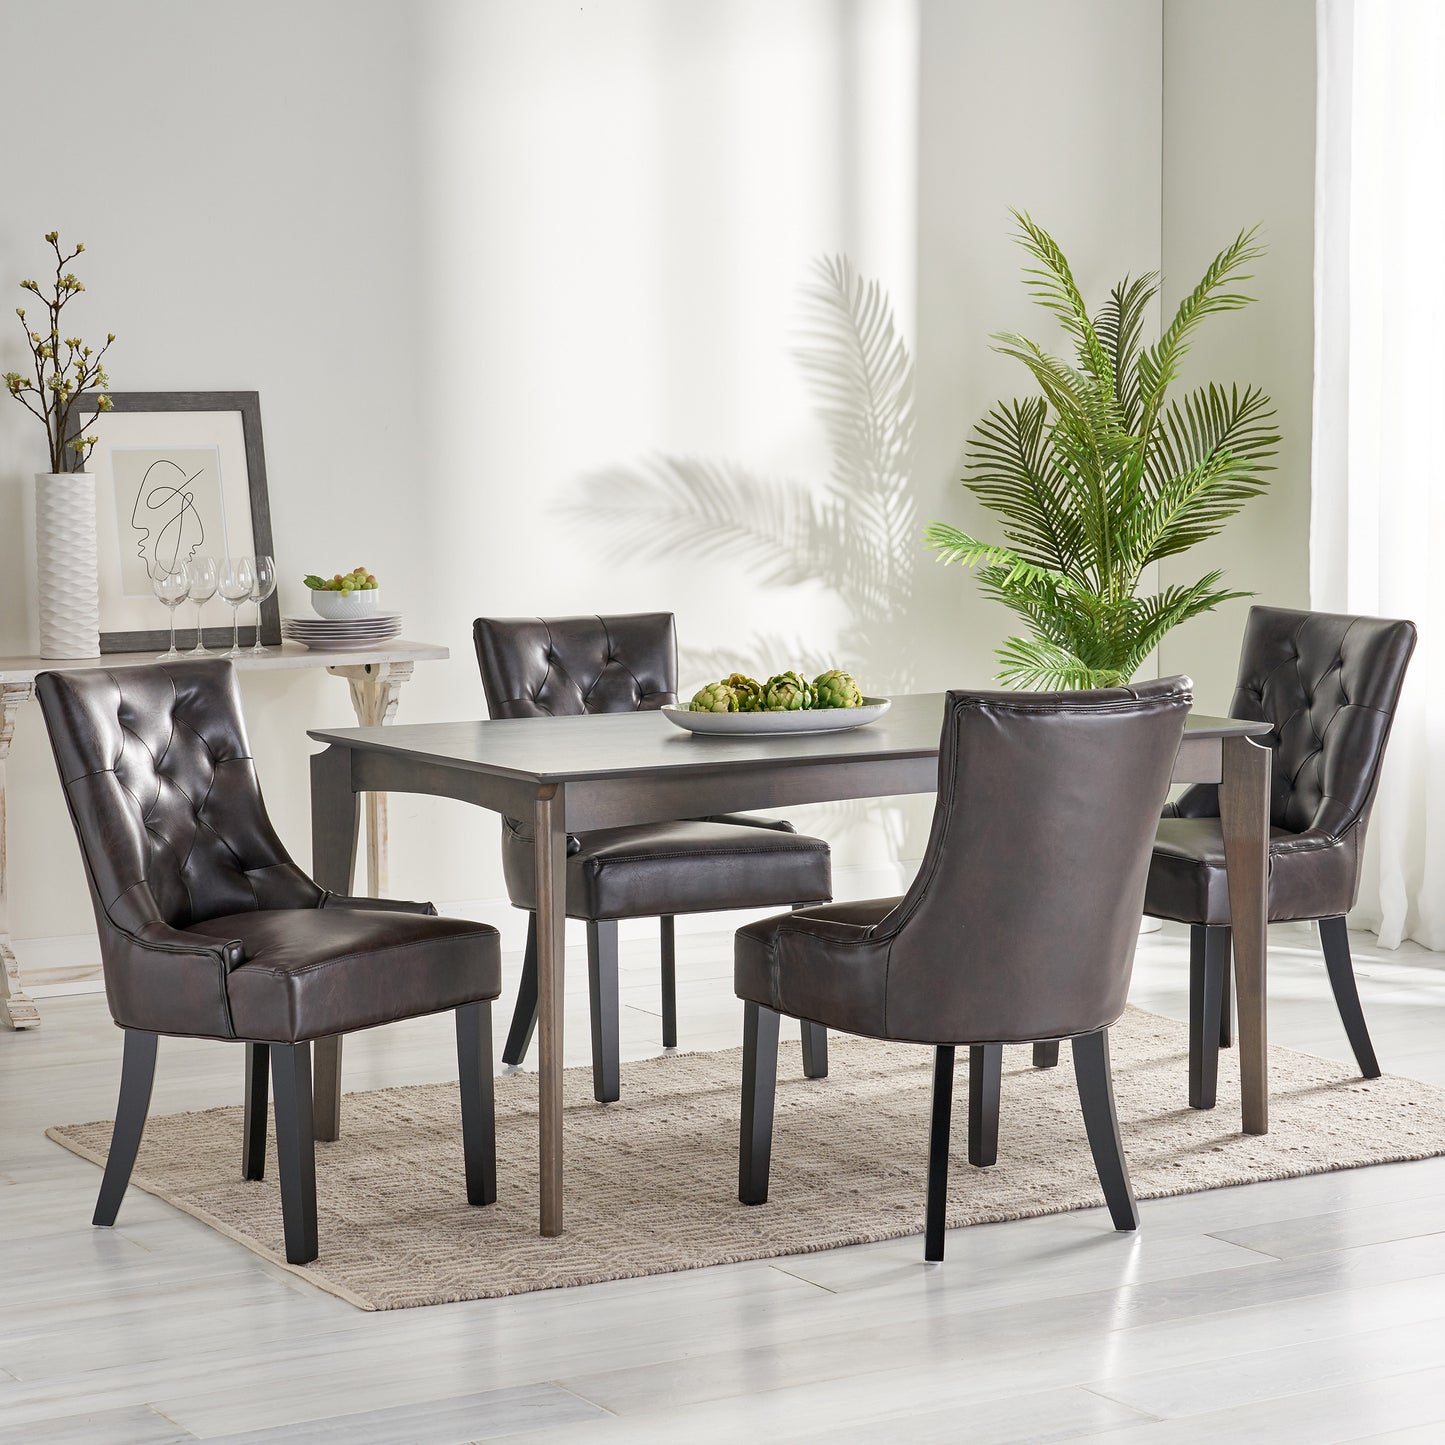 Stacy Hourglass Leather Dining Chairs (Set of 4)